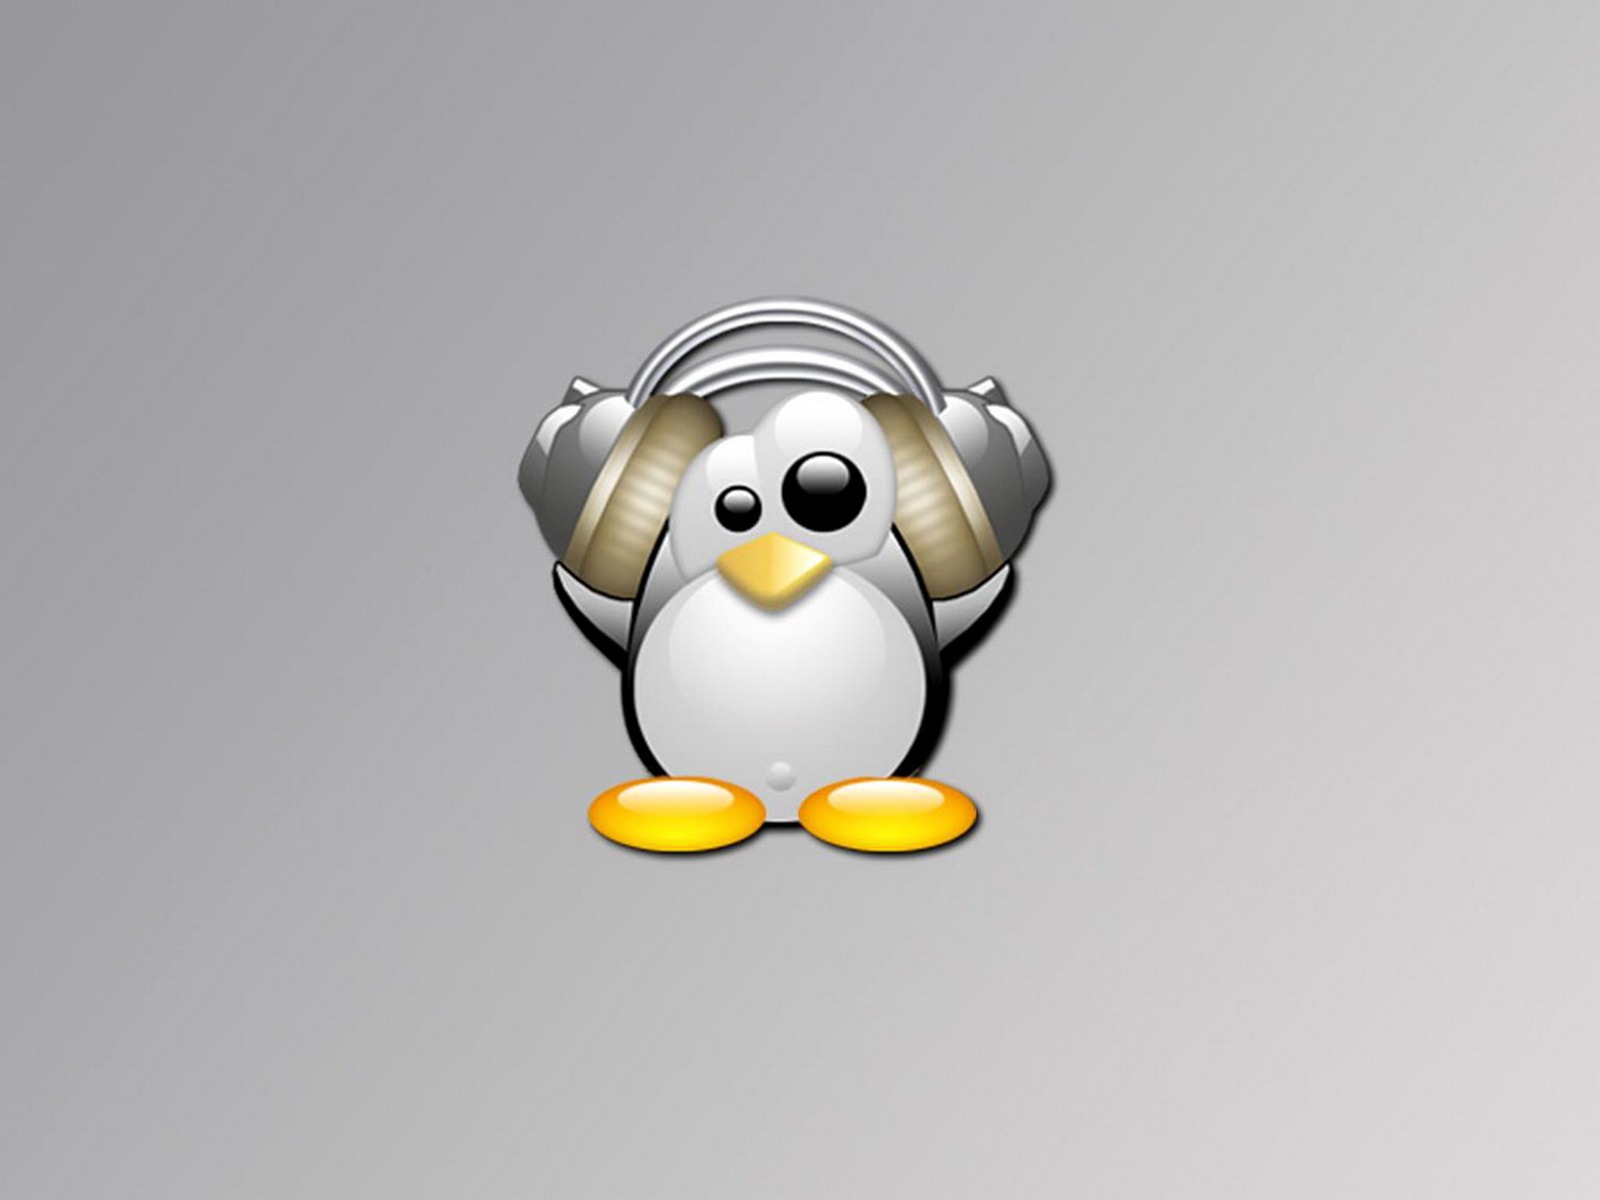 Linux tapety (3) #14 - 1600x1200